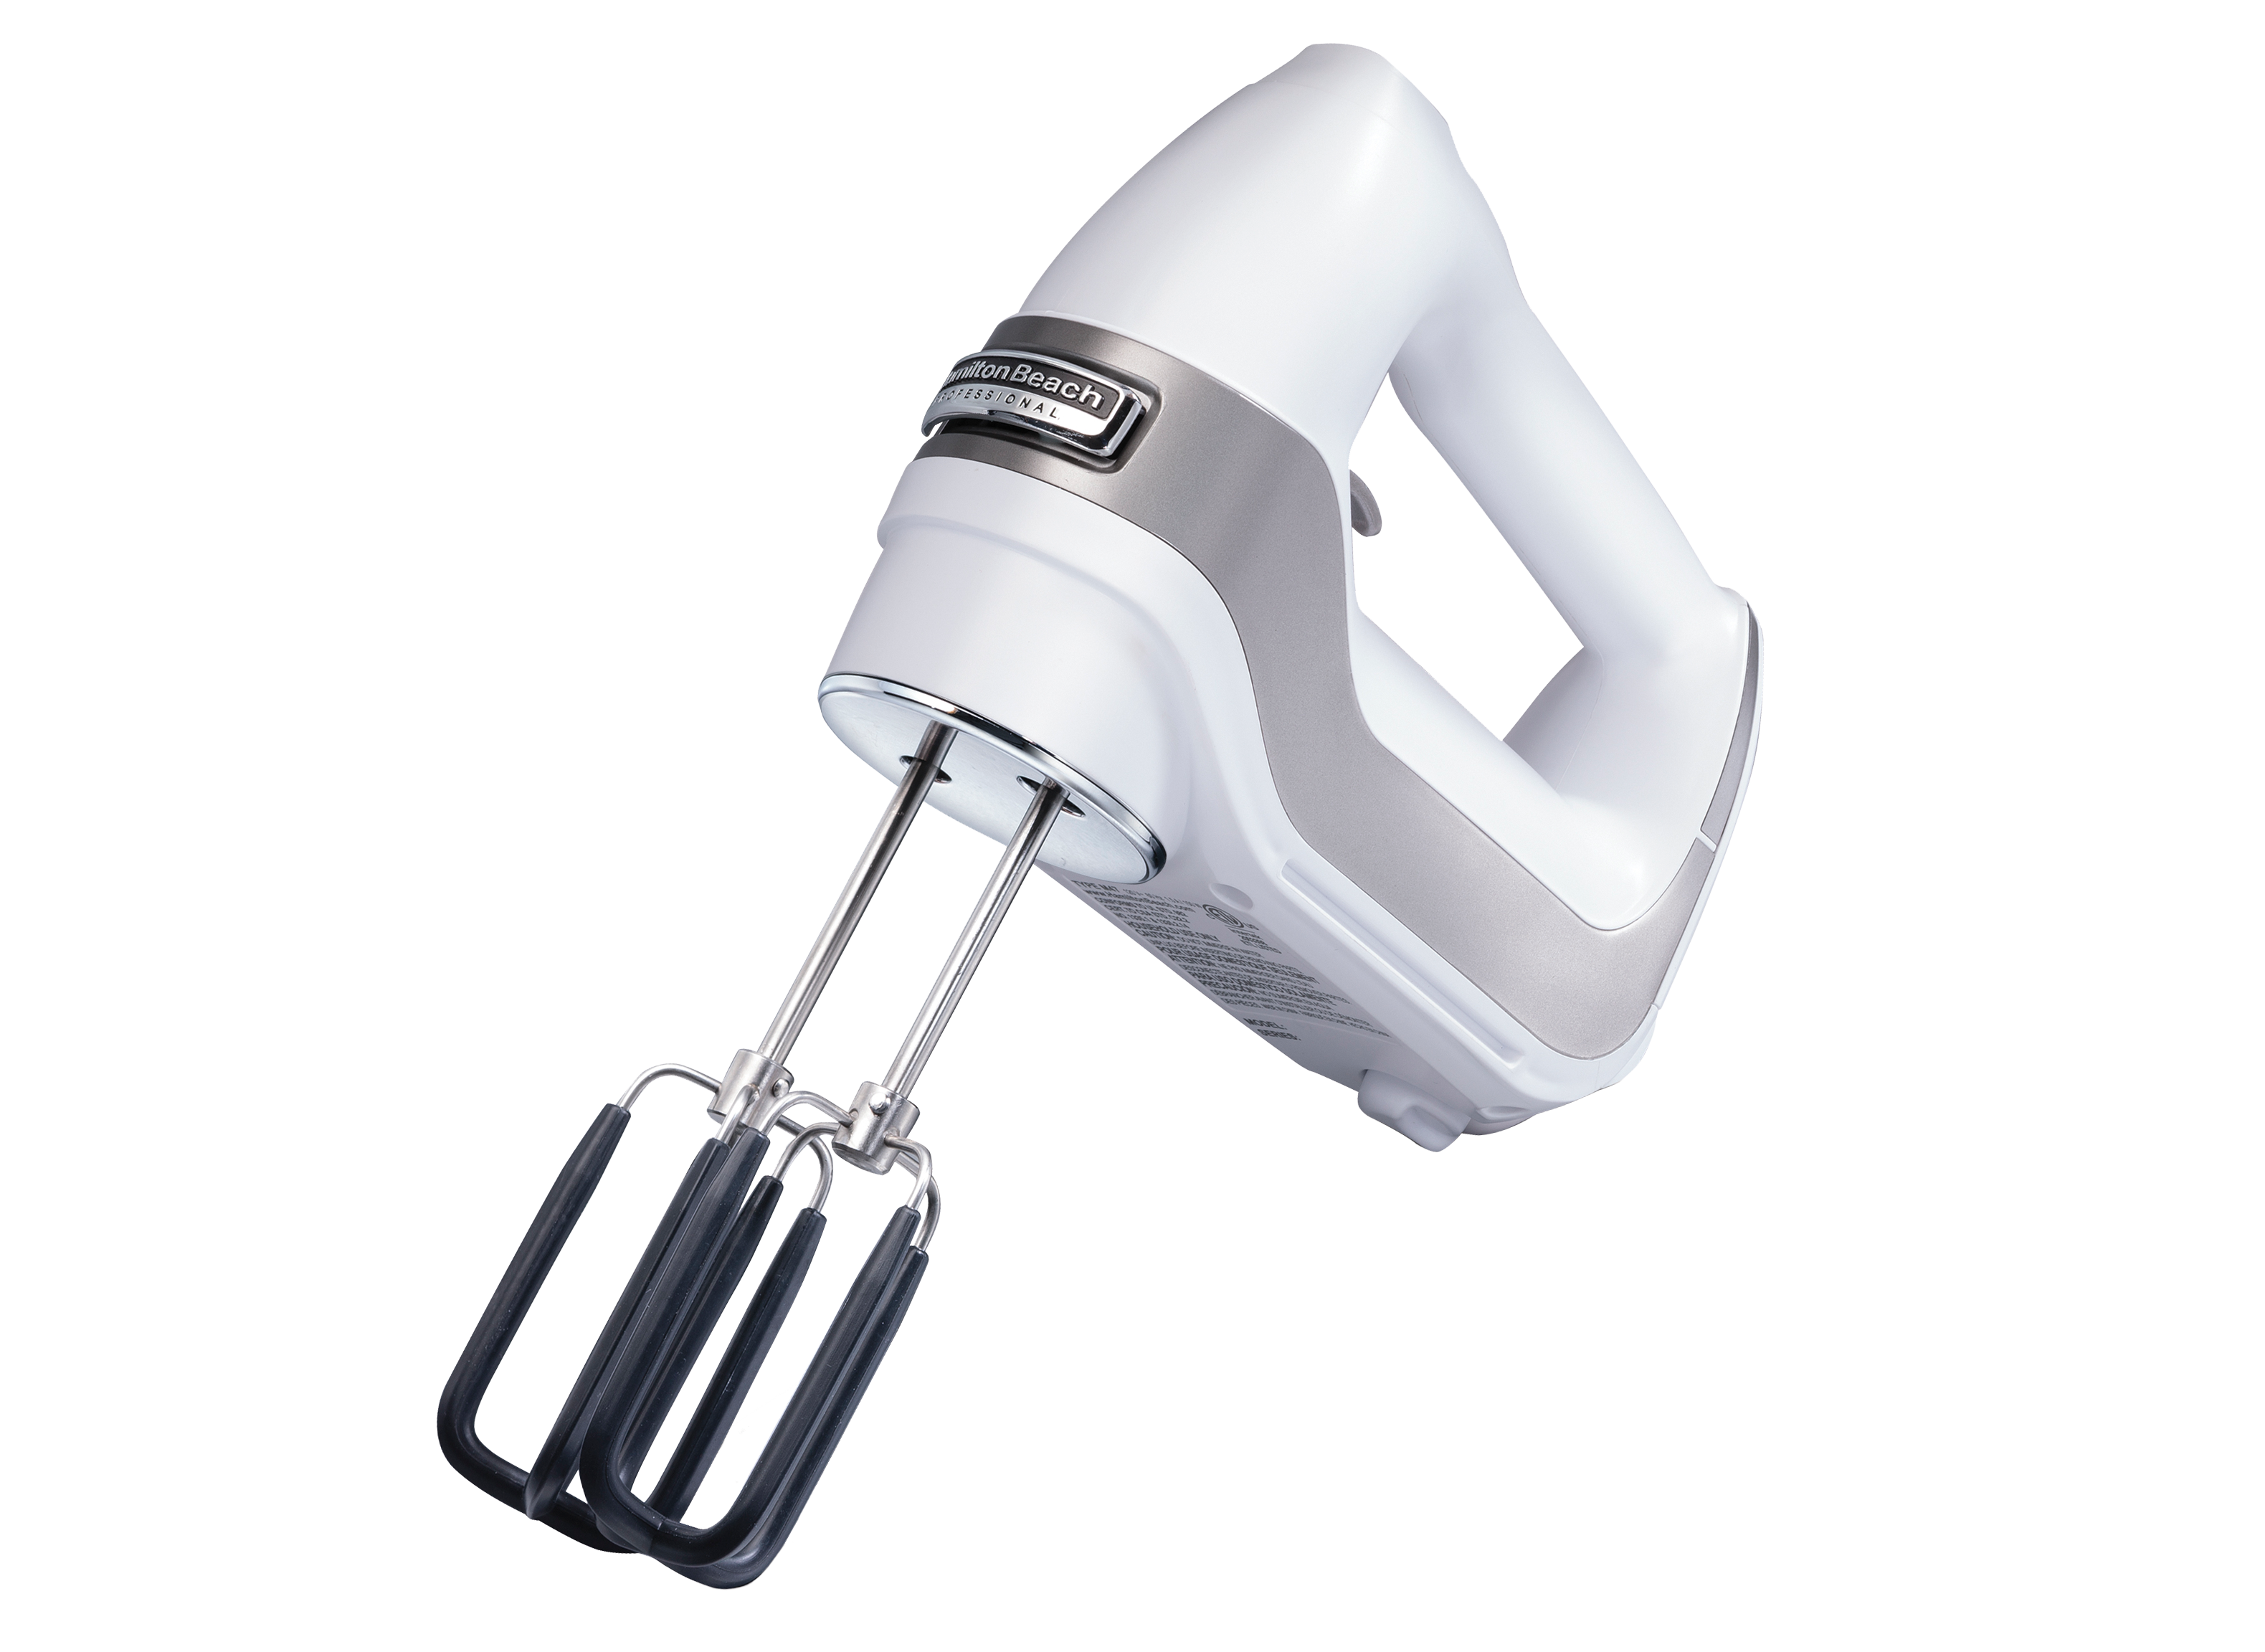 https://crdms.images.consumerreports.org/prod/products/cr/models/400143-hand-mixers-hamilton-beach-professional-7-speed-62656-10009280.png